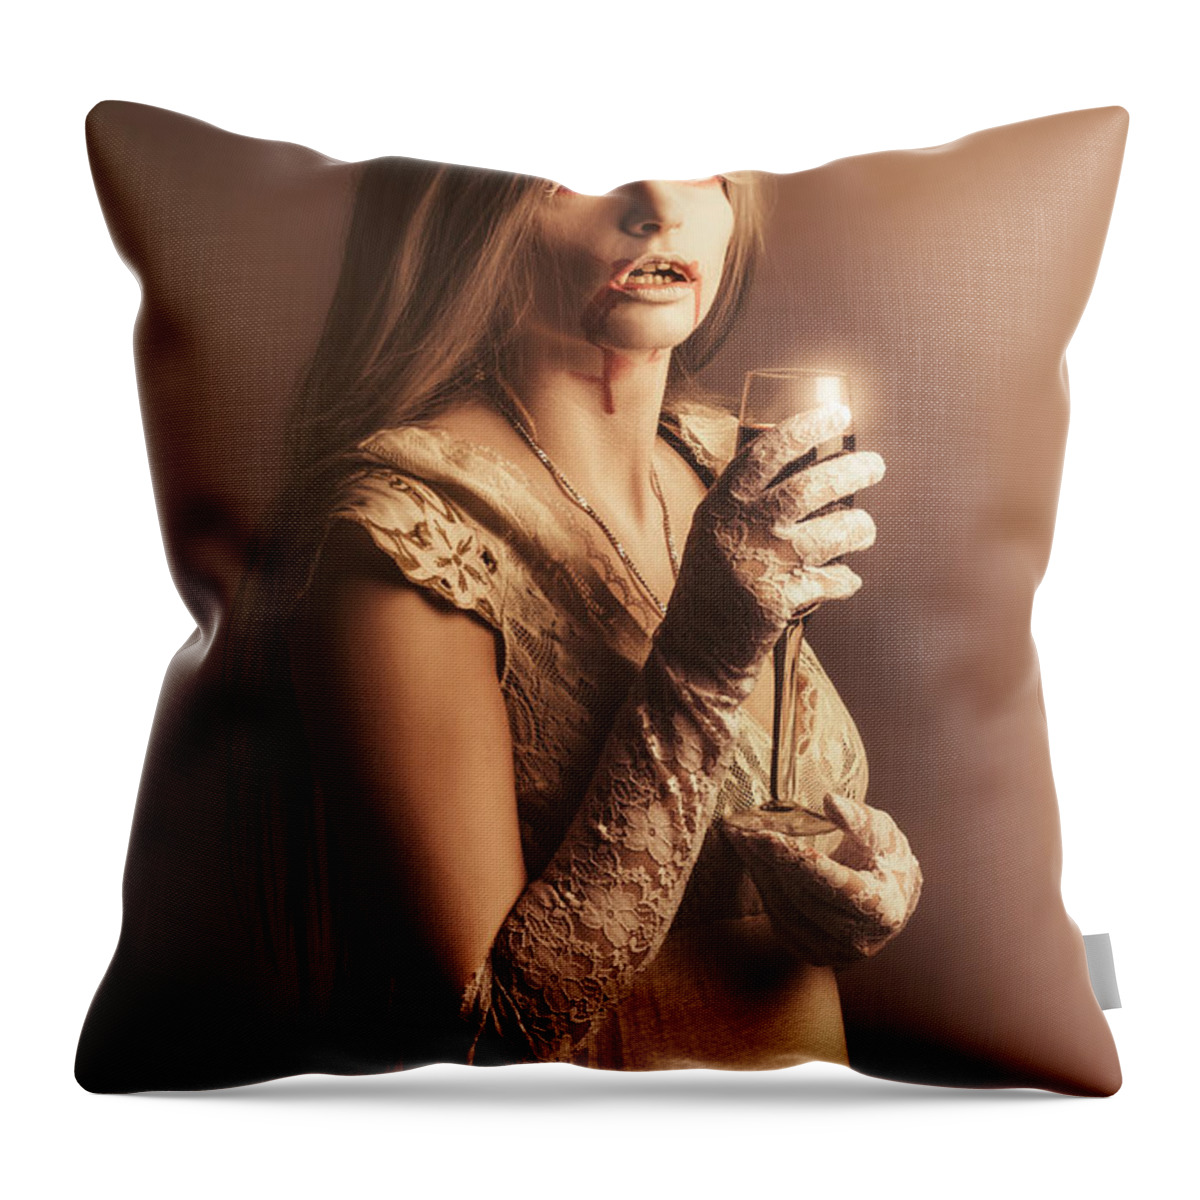 Vampire Throw Pillow featuring the photograph Spooky vampire girl drinking a glass of red wine by Jorgo Photography